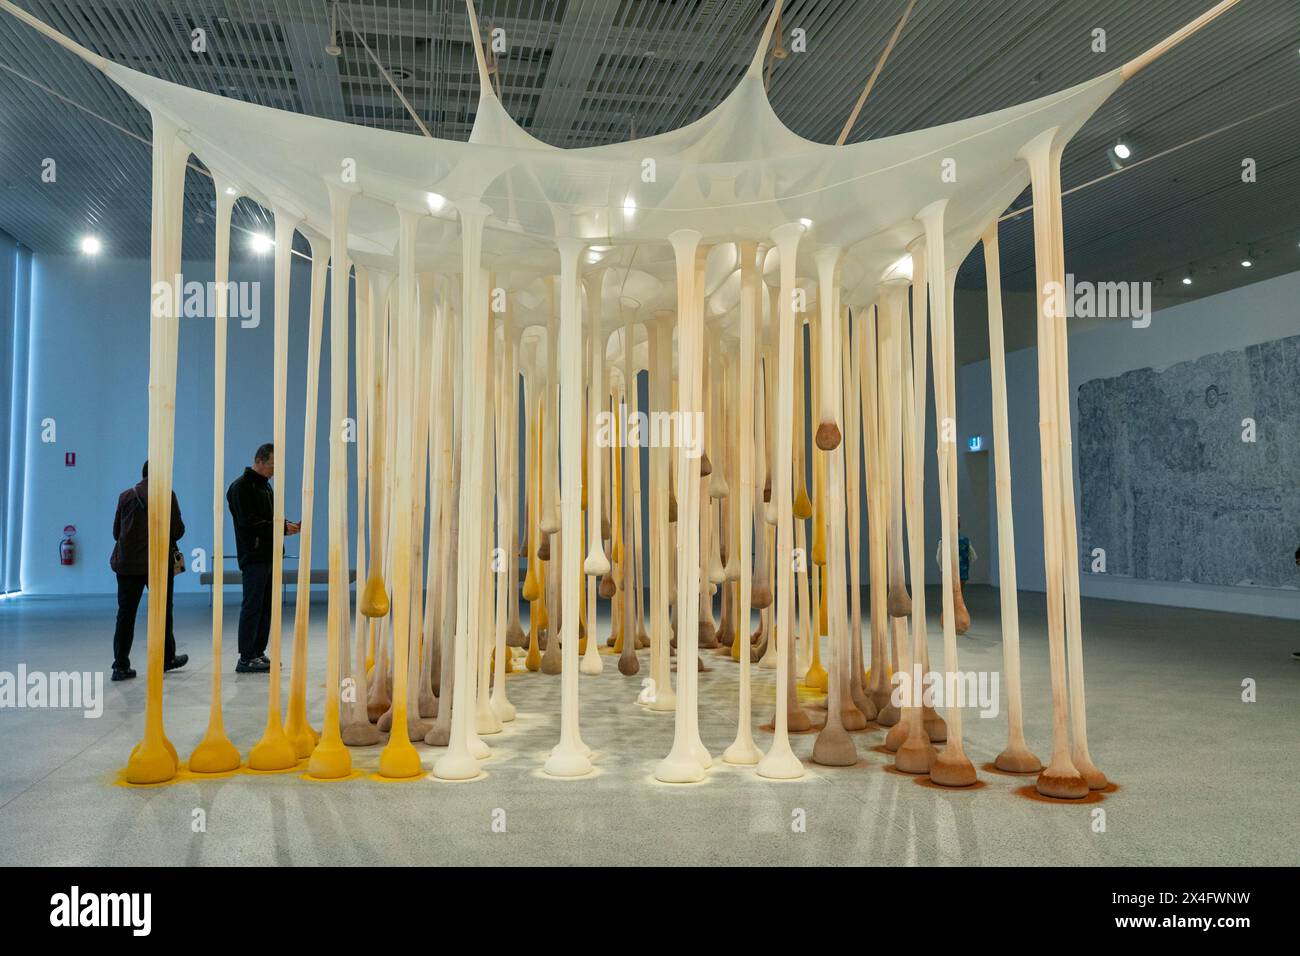 Ernesto Neto’s, Just like drops in time, nothing art installation in Art Gallery of New South Wales extension Naala Badu building,Sydney,Australia Stock Photo